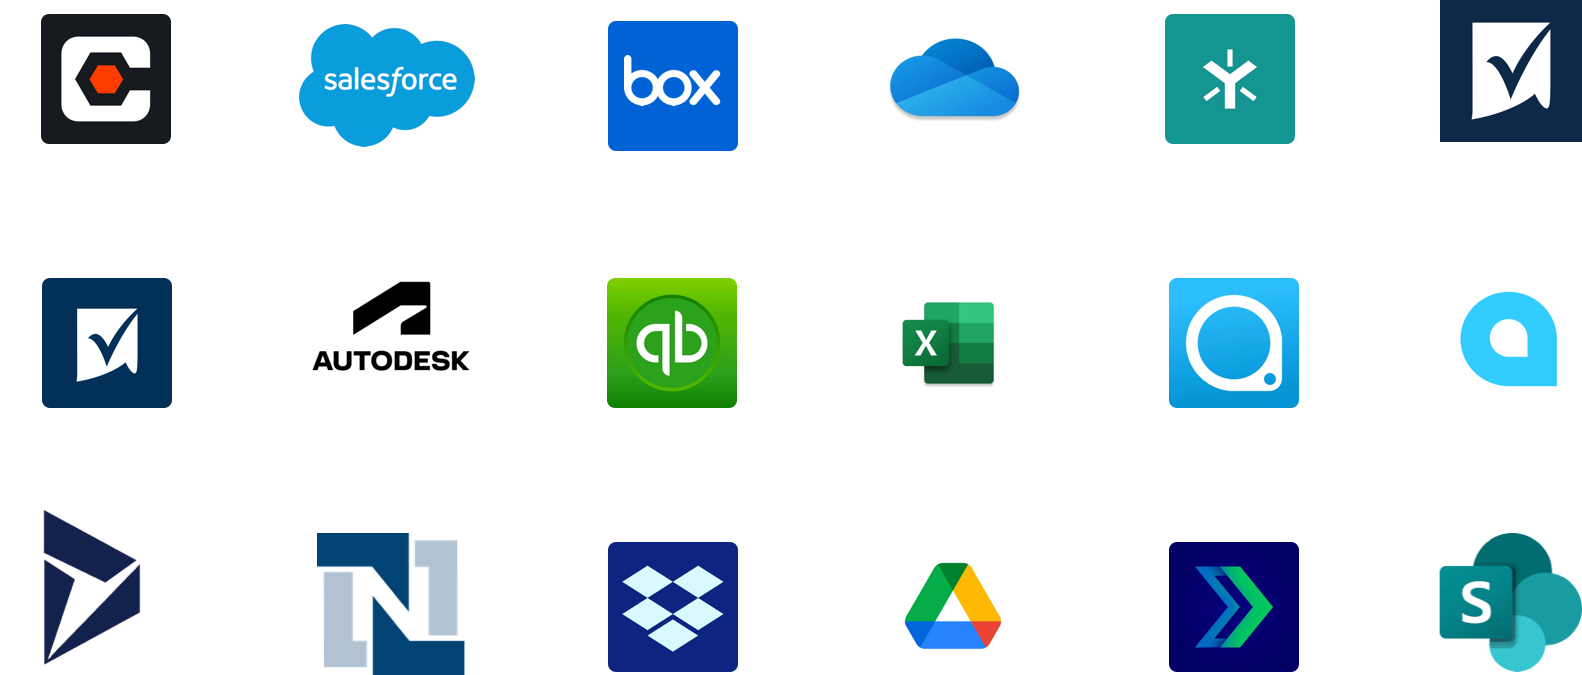 A grid of logos showing the different business systems GoFormz integrates with.